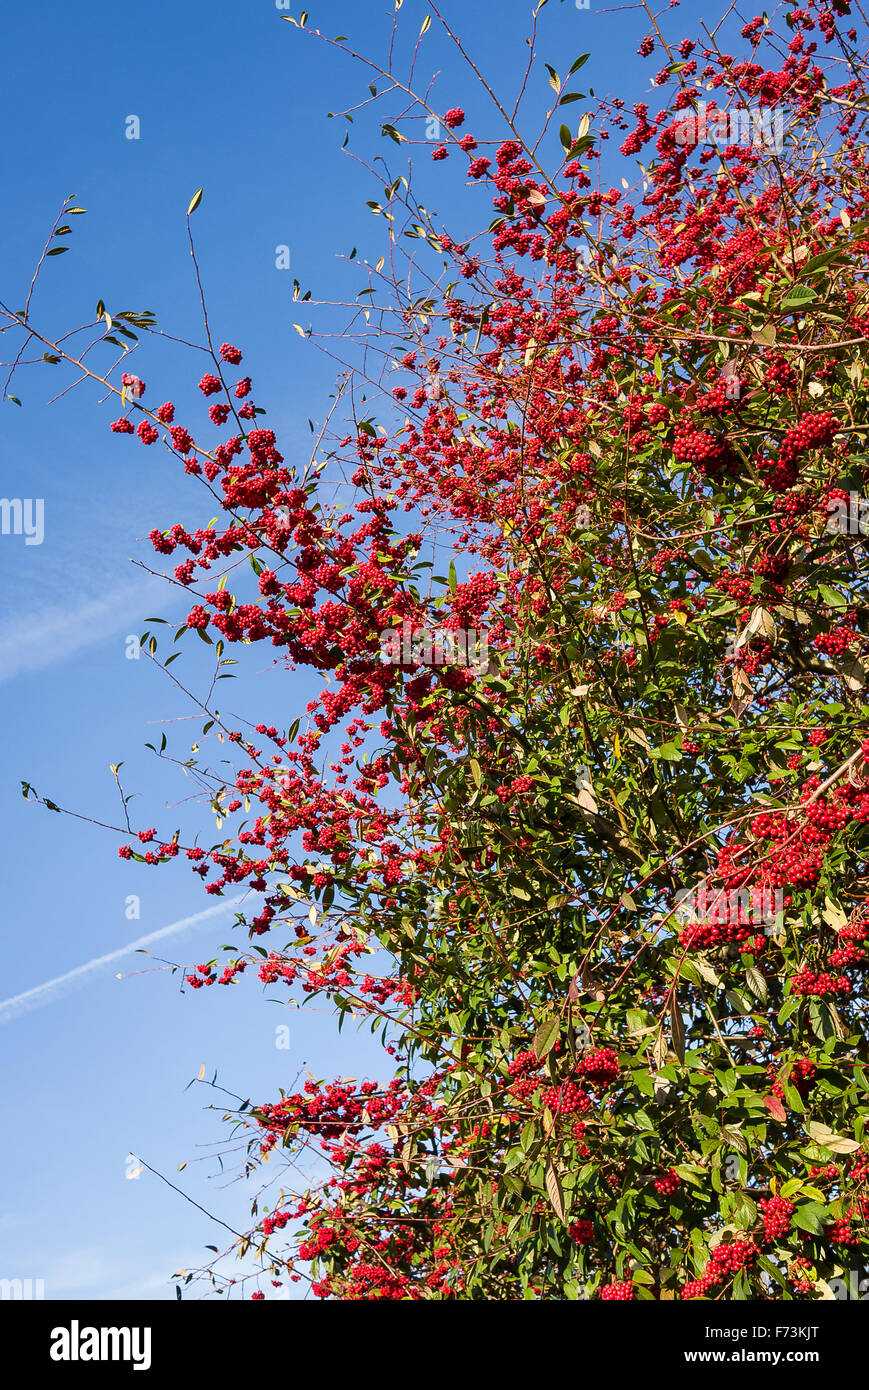 Red berries of a mature cotoneaster tree in urban landscaping Stock Photo